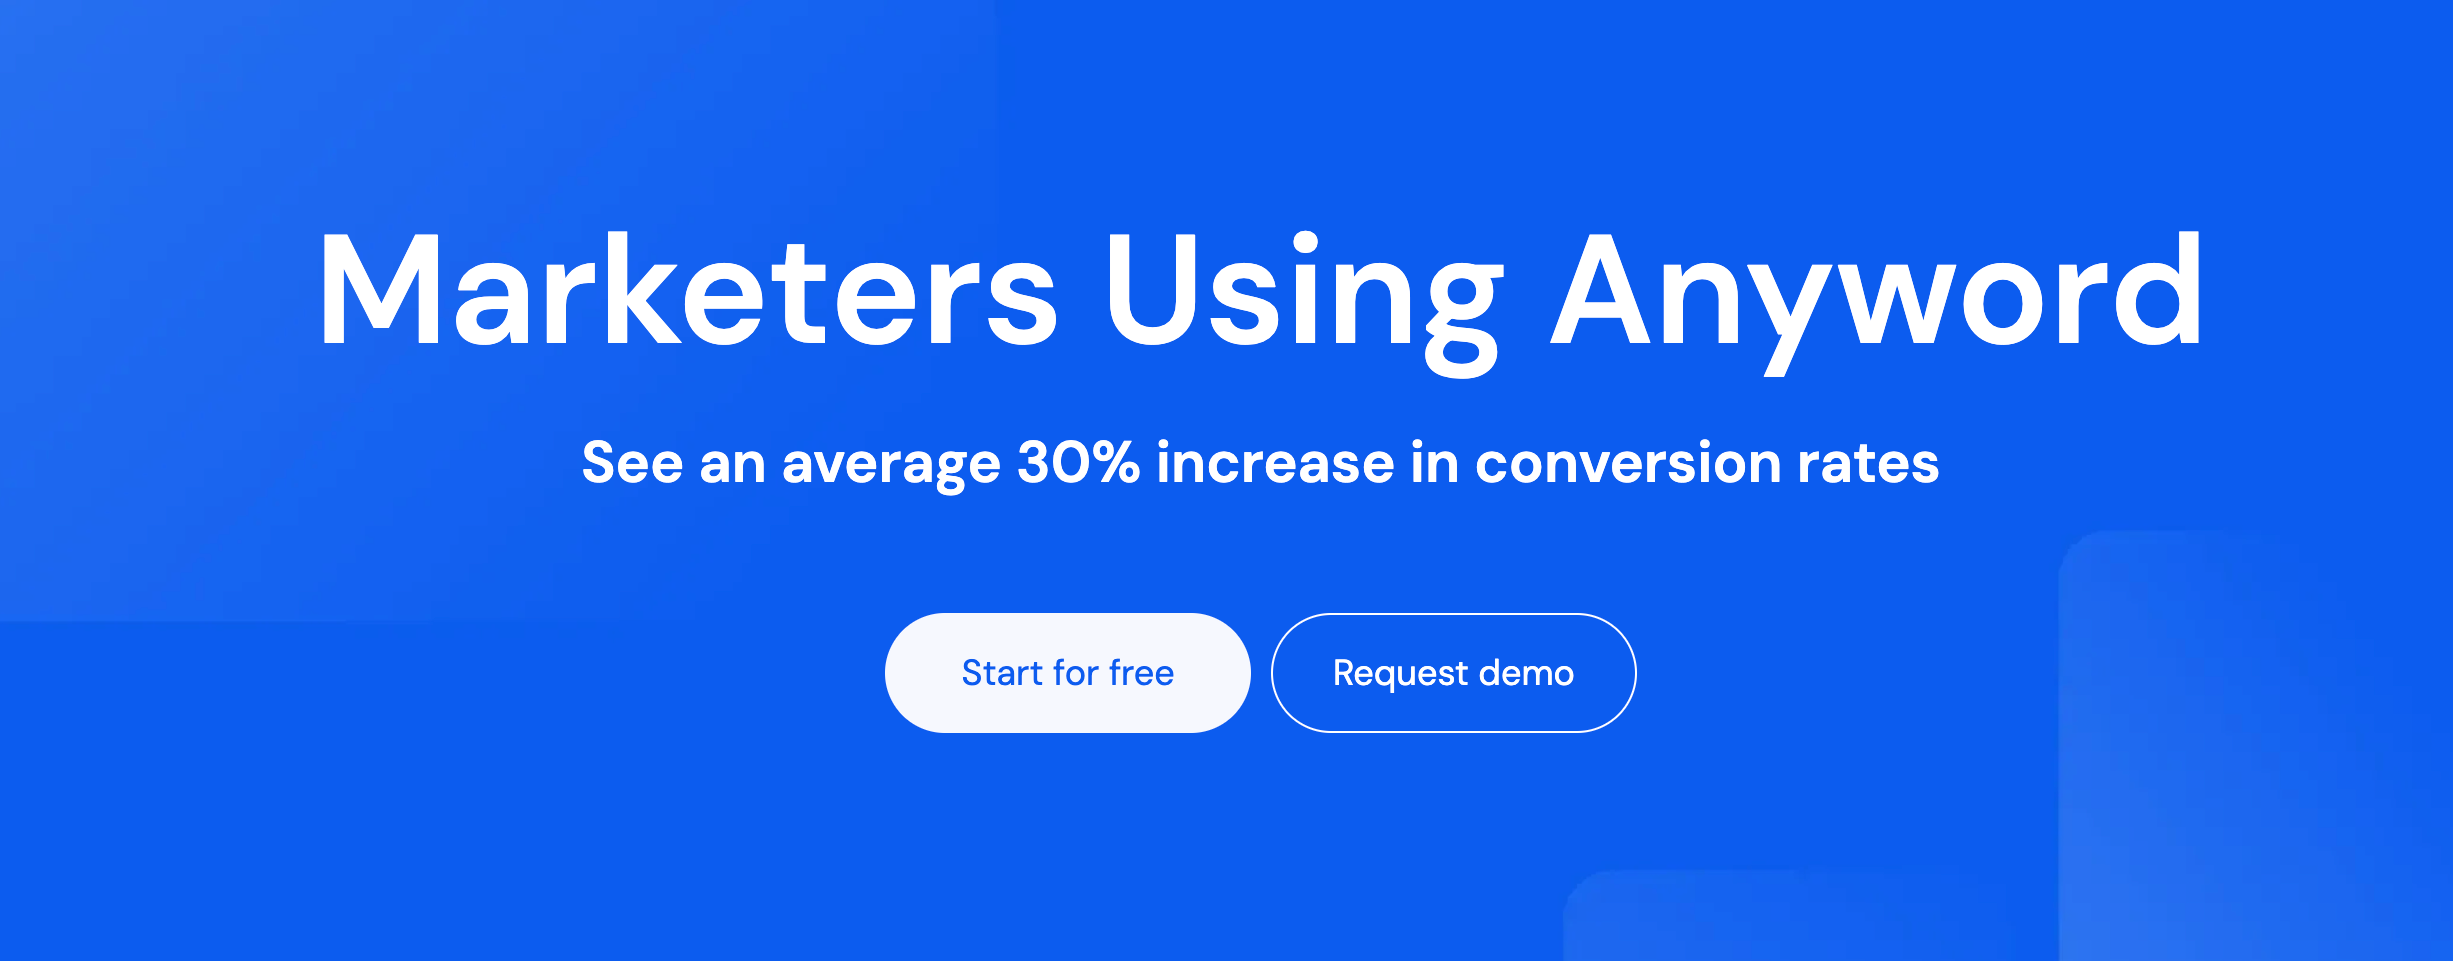 Marketers using Anyword see an average 30% increase in conversion rates